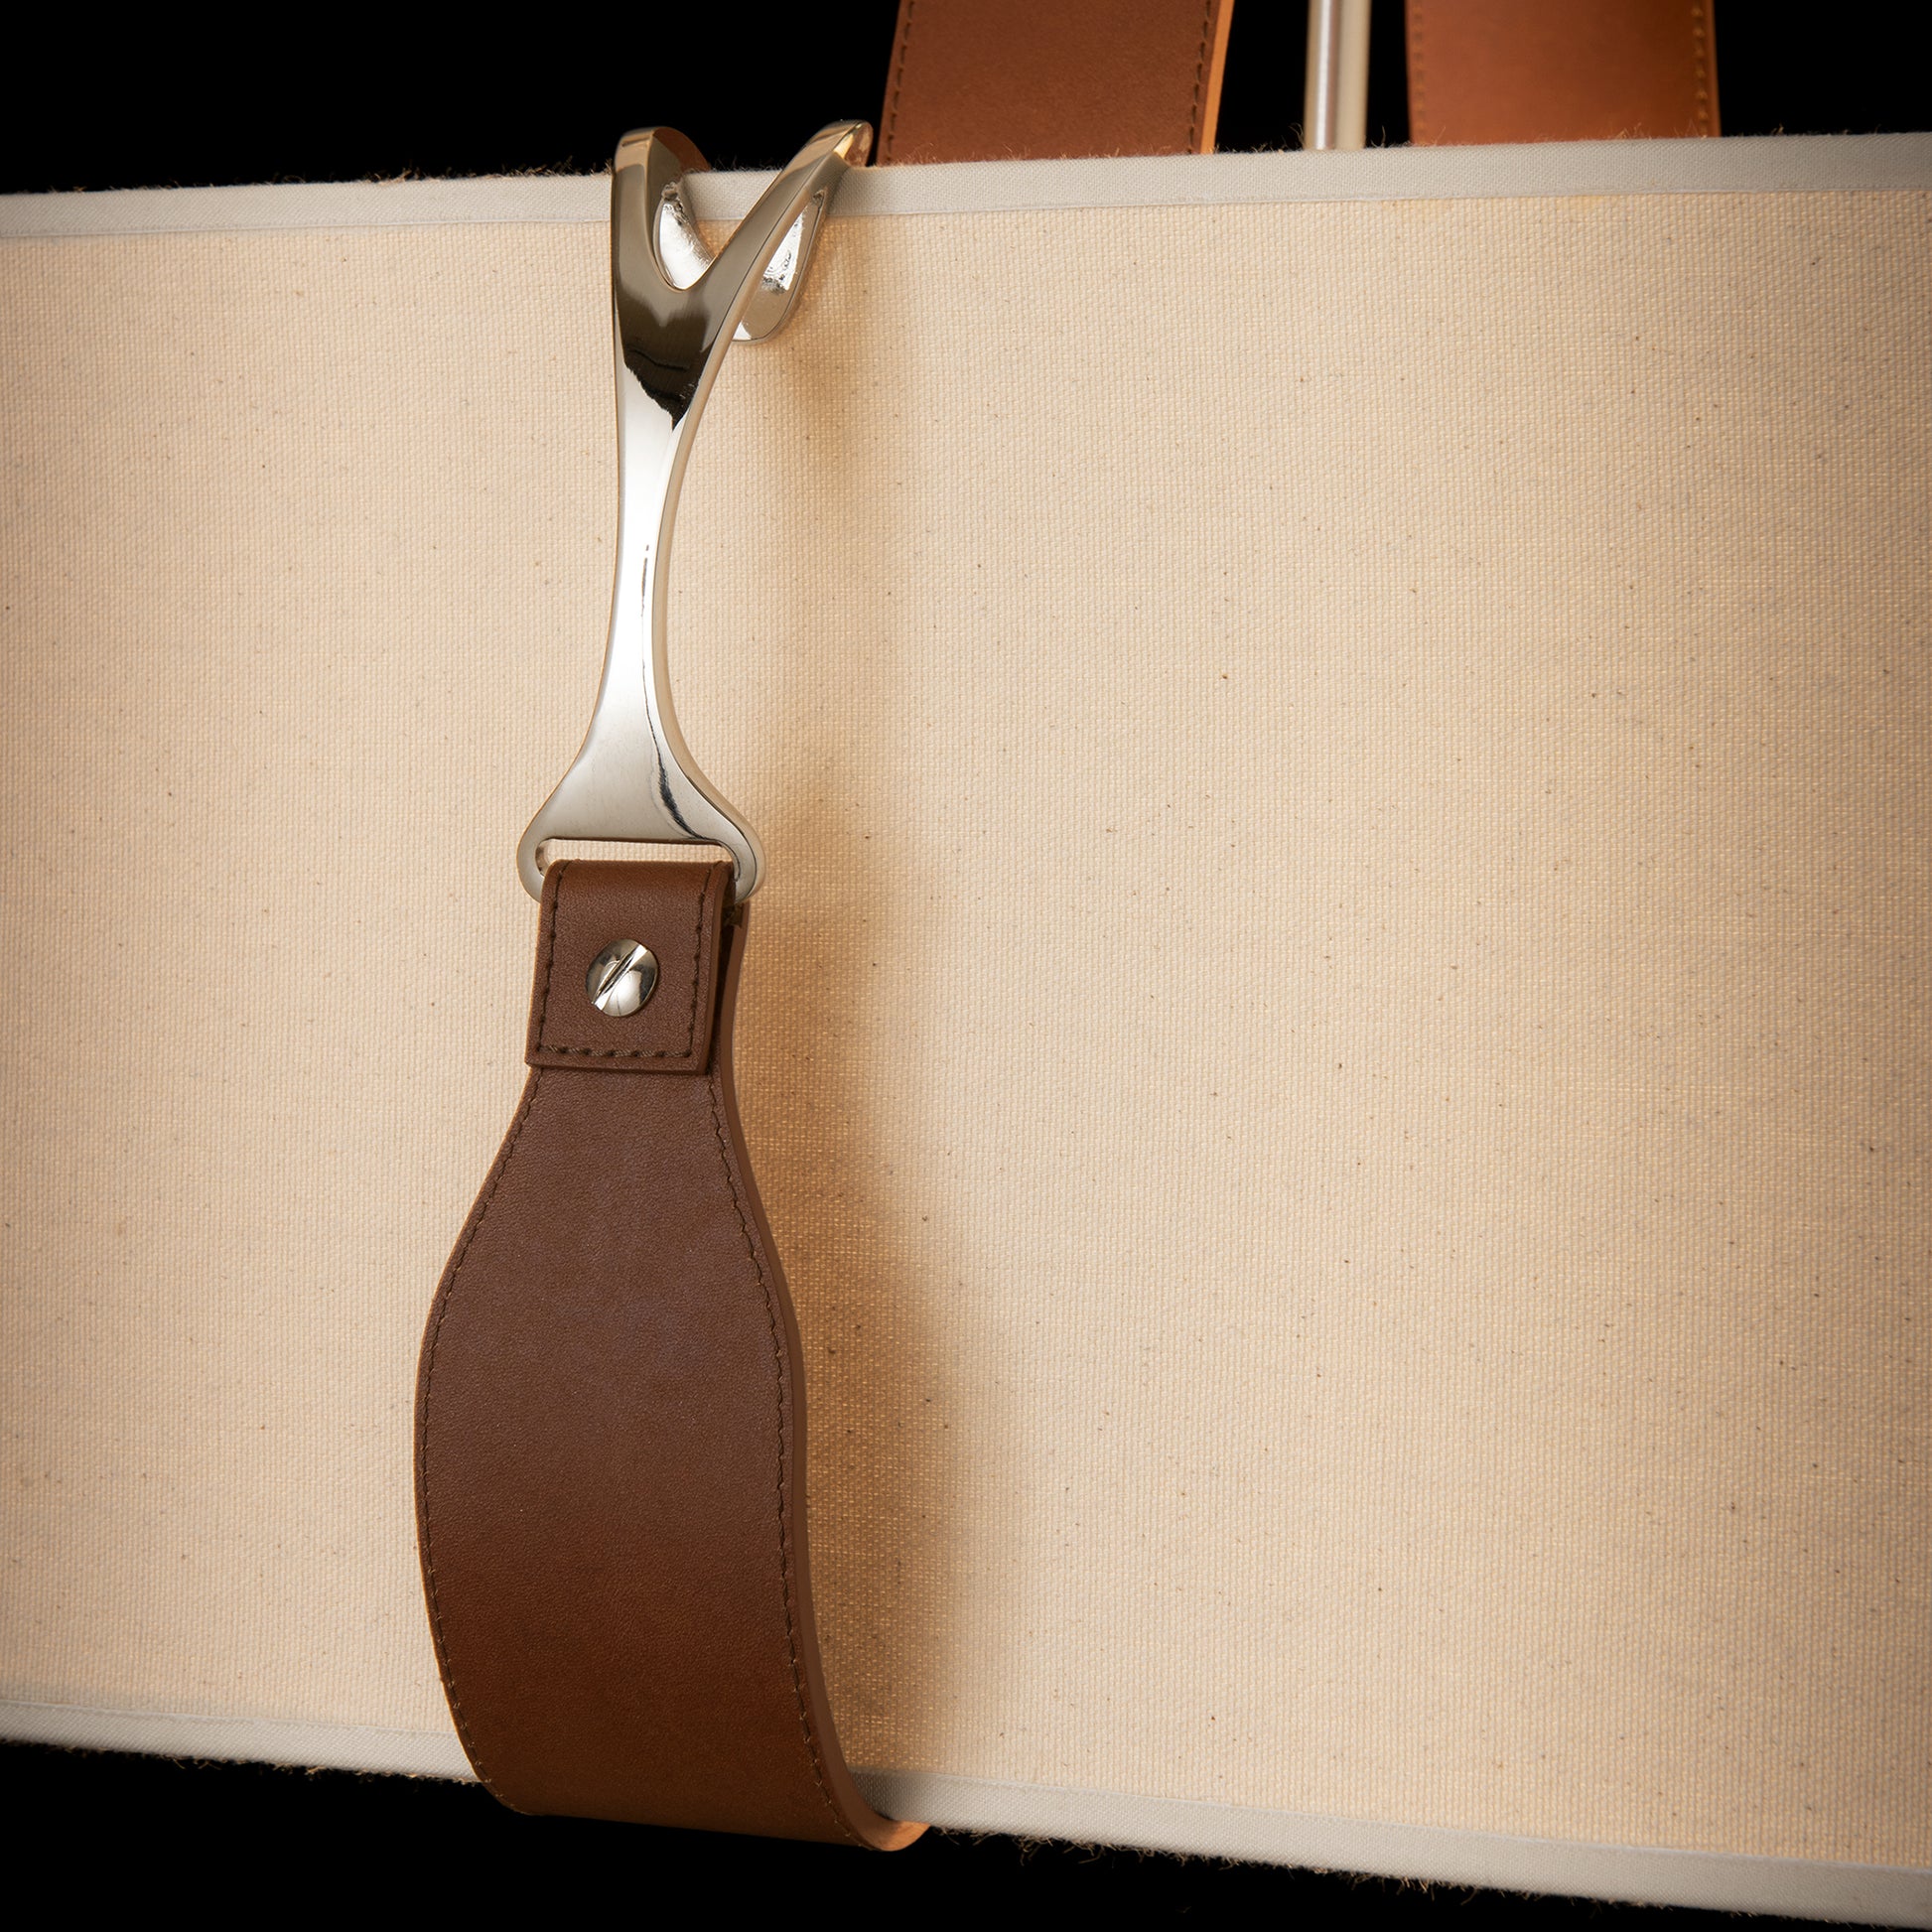 Close-up of a stylish canvas and leather bag, featuring a Saratoga Oval Pendant on the metallic buckle and brown leather straps against a dark background.